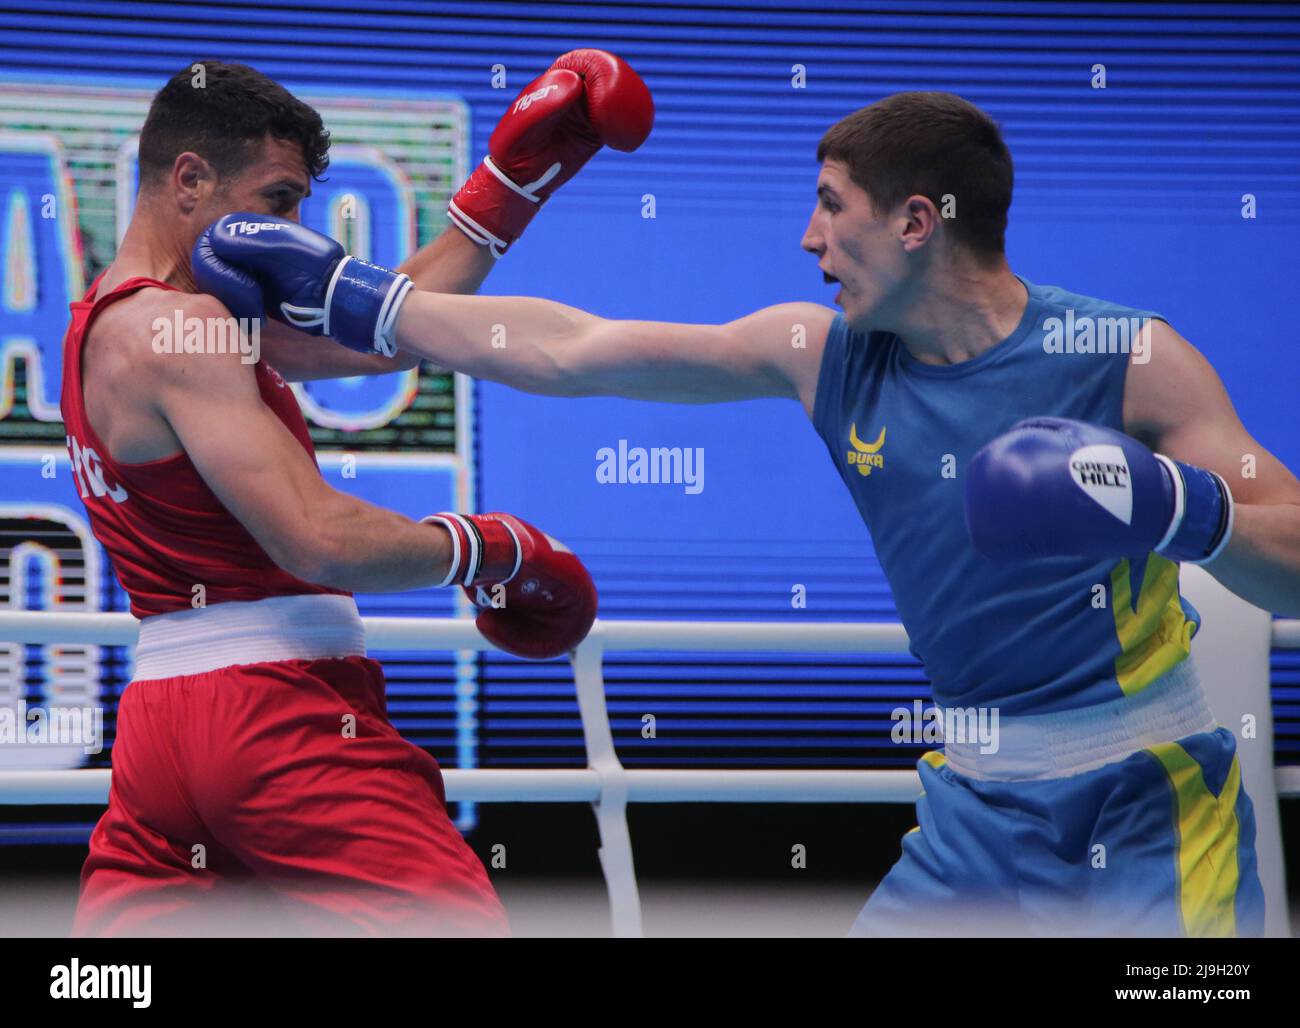 Yerevan, Armenia, on May 23rd 2022, George Crotty from United Kingdom (Red) competes against Ivan Sapun from Ukraine (Blue) in EUBC Elite European Men’s Boxing Championships 2022, Hrach Khachatryan/ Alamy Live News Stock Photo